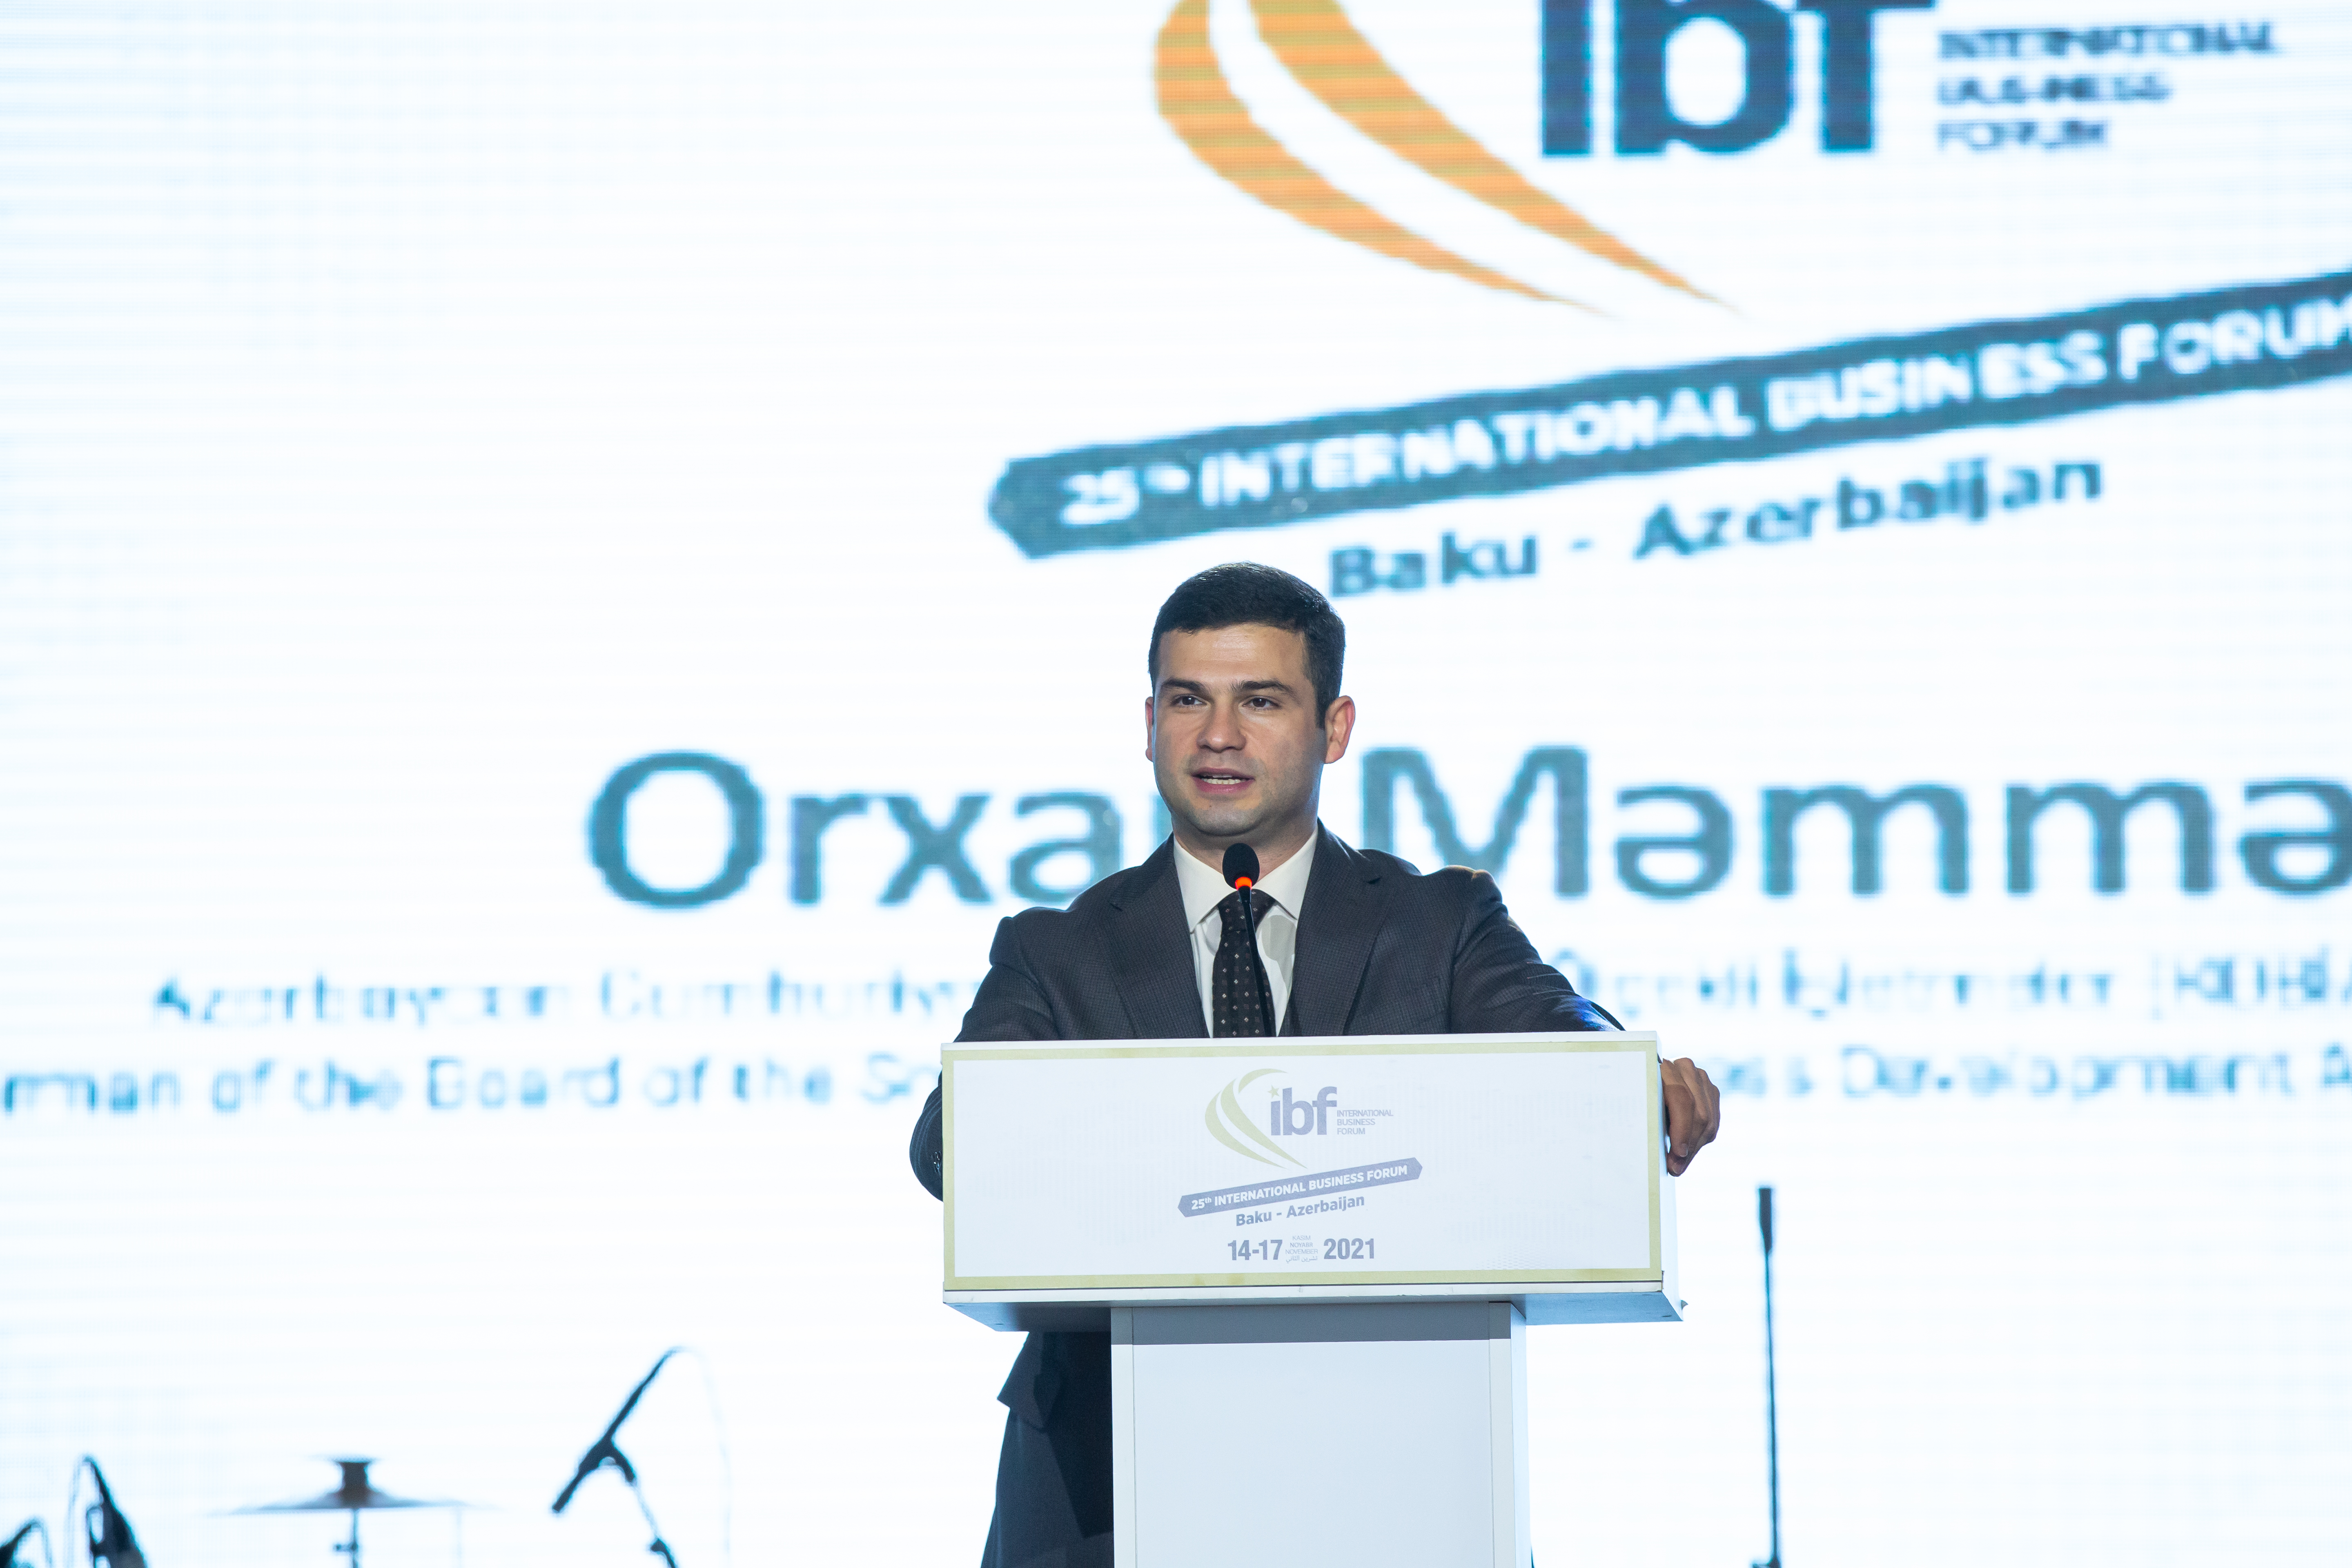 The 25th International Business Forum has ended 